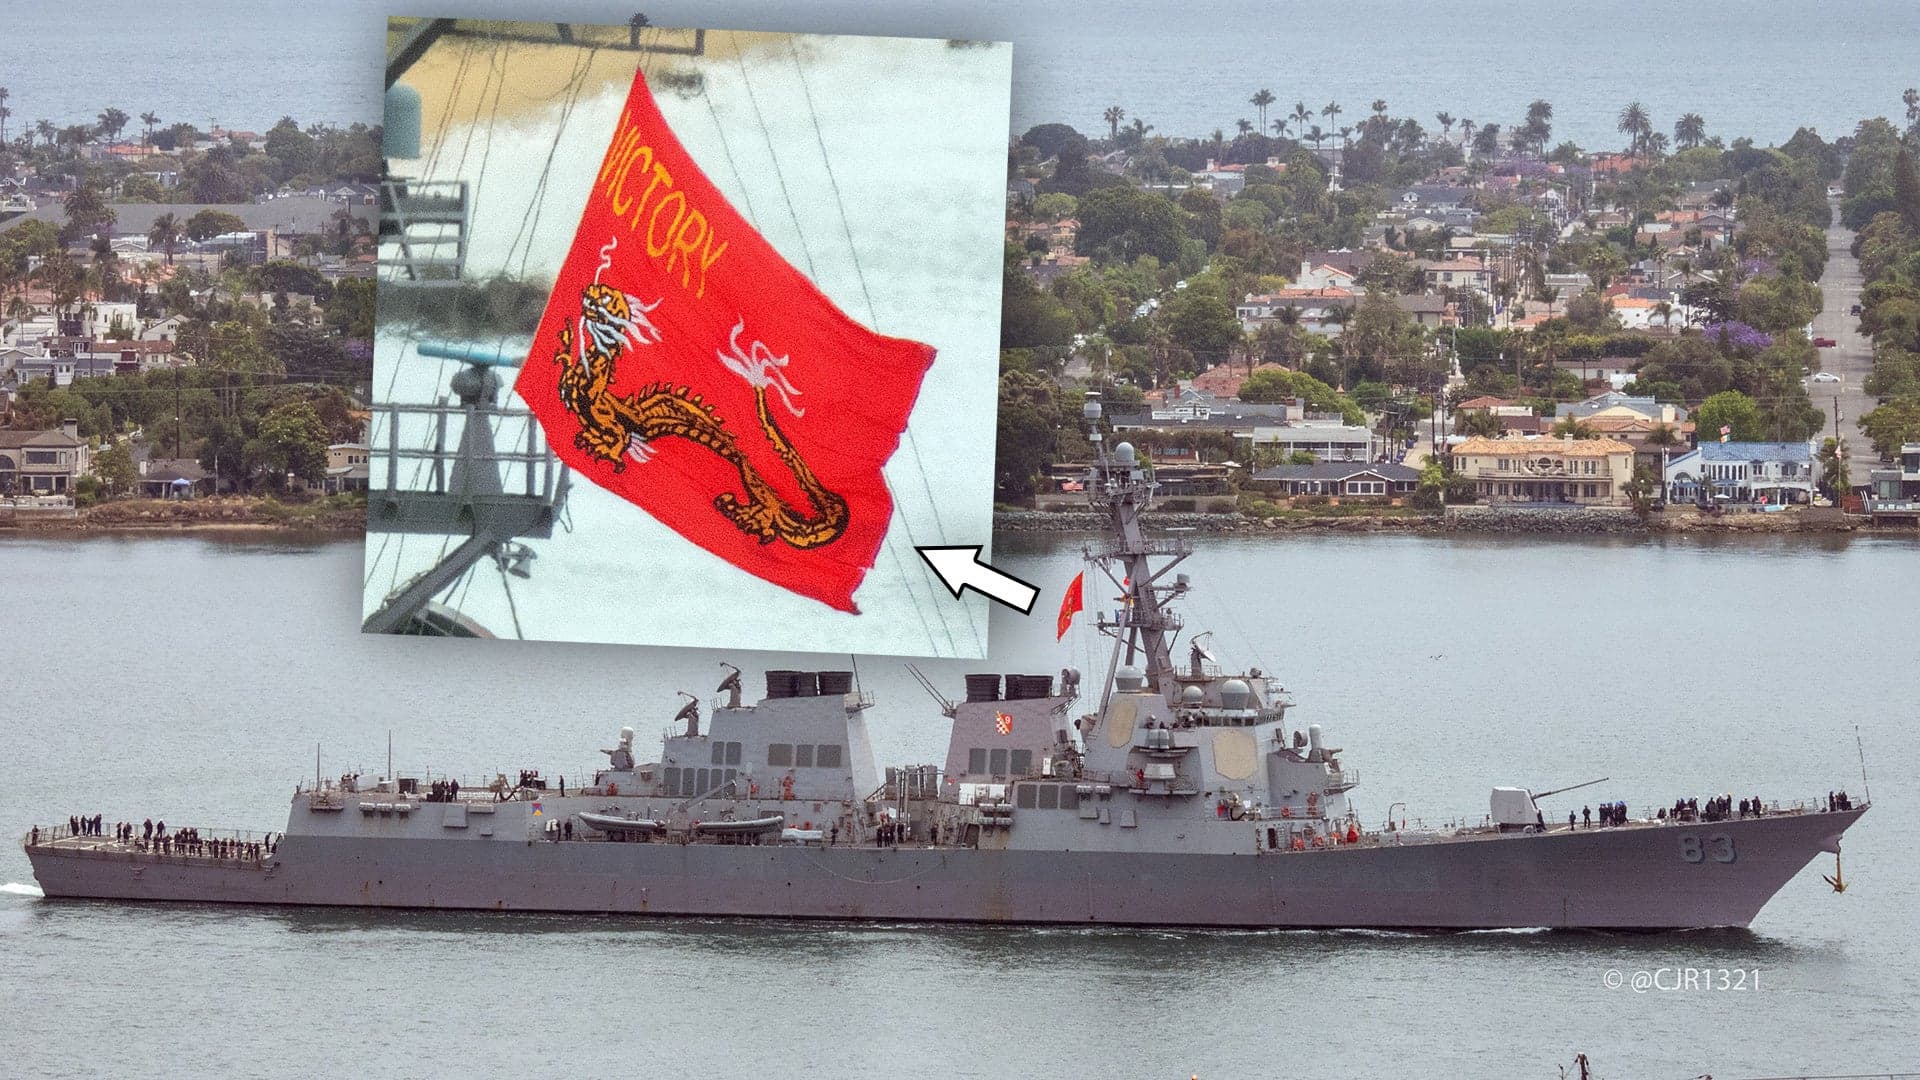 Why The Destroyer USS Howard Left Port Flying A Bright Red Flag Adorned With An Asian Dragon